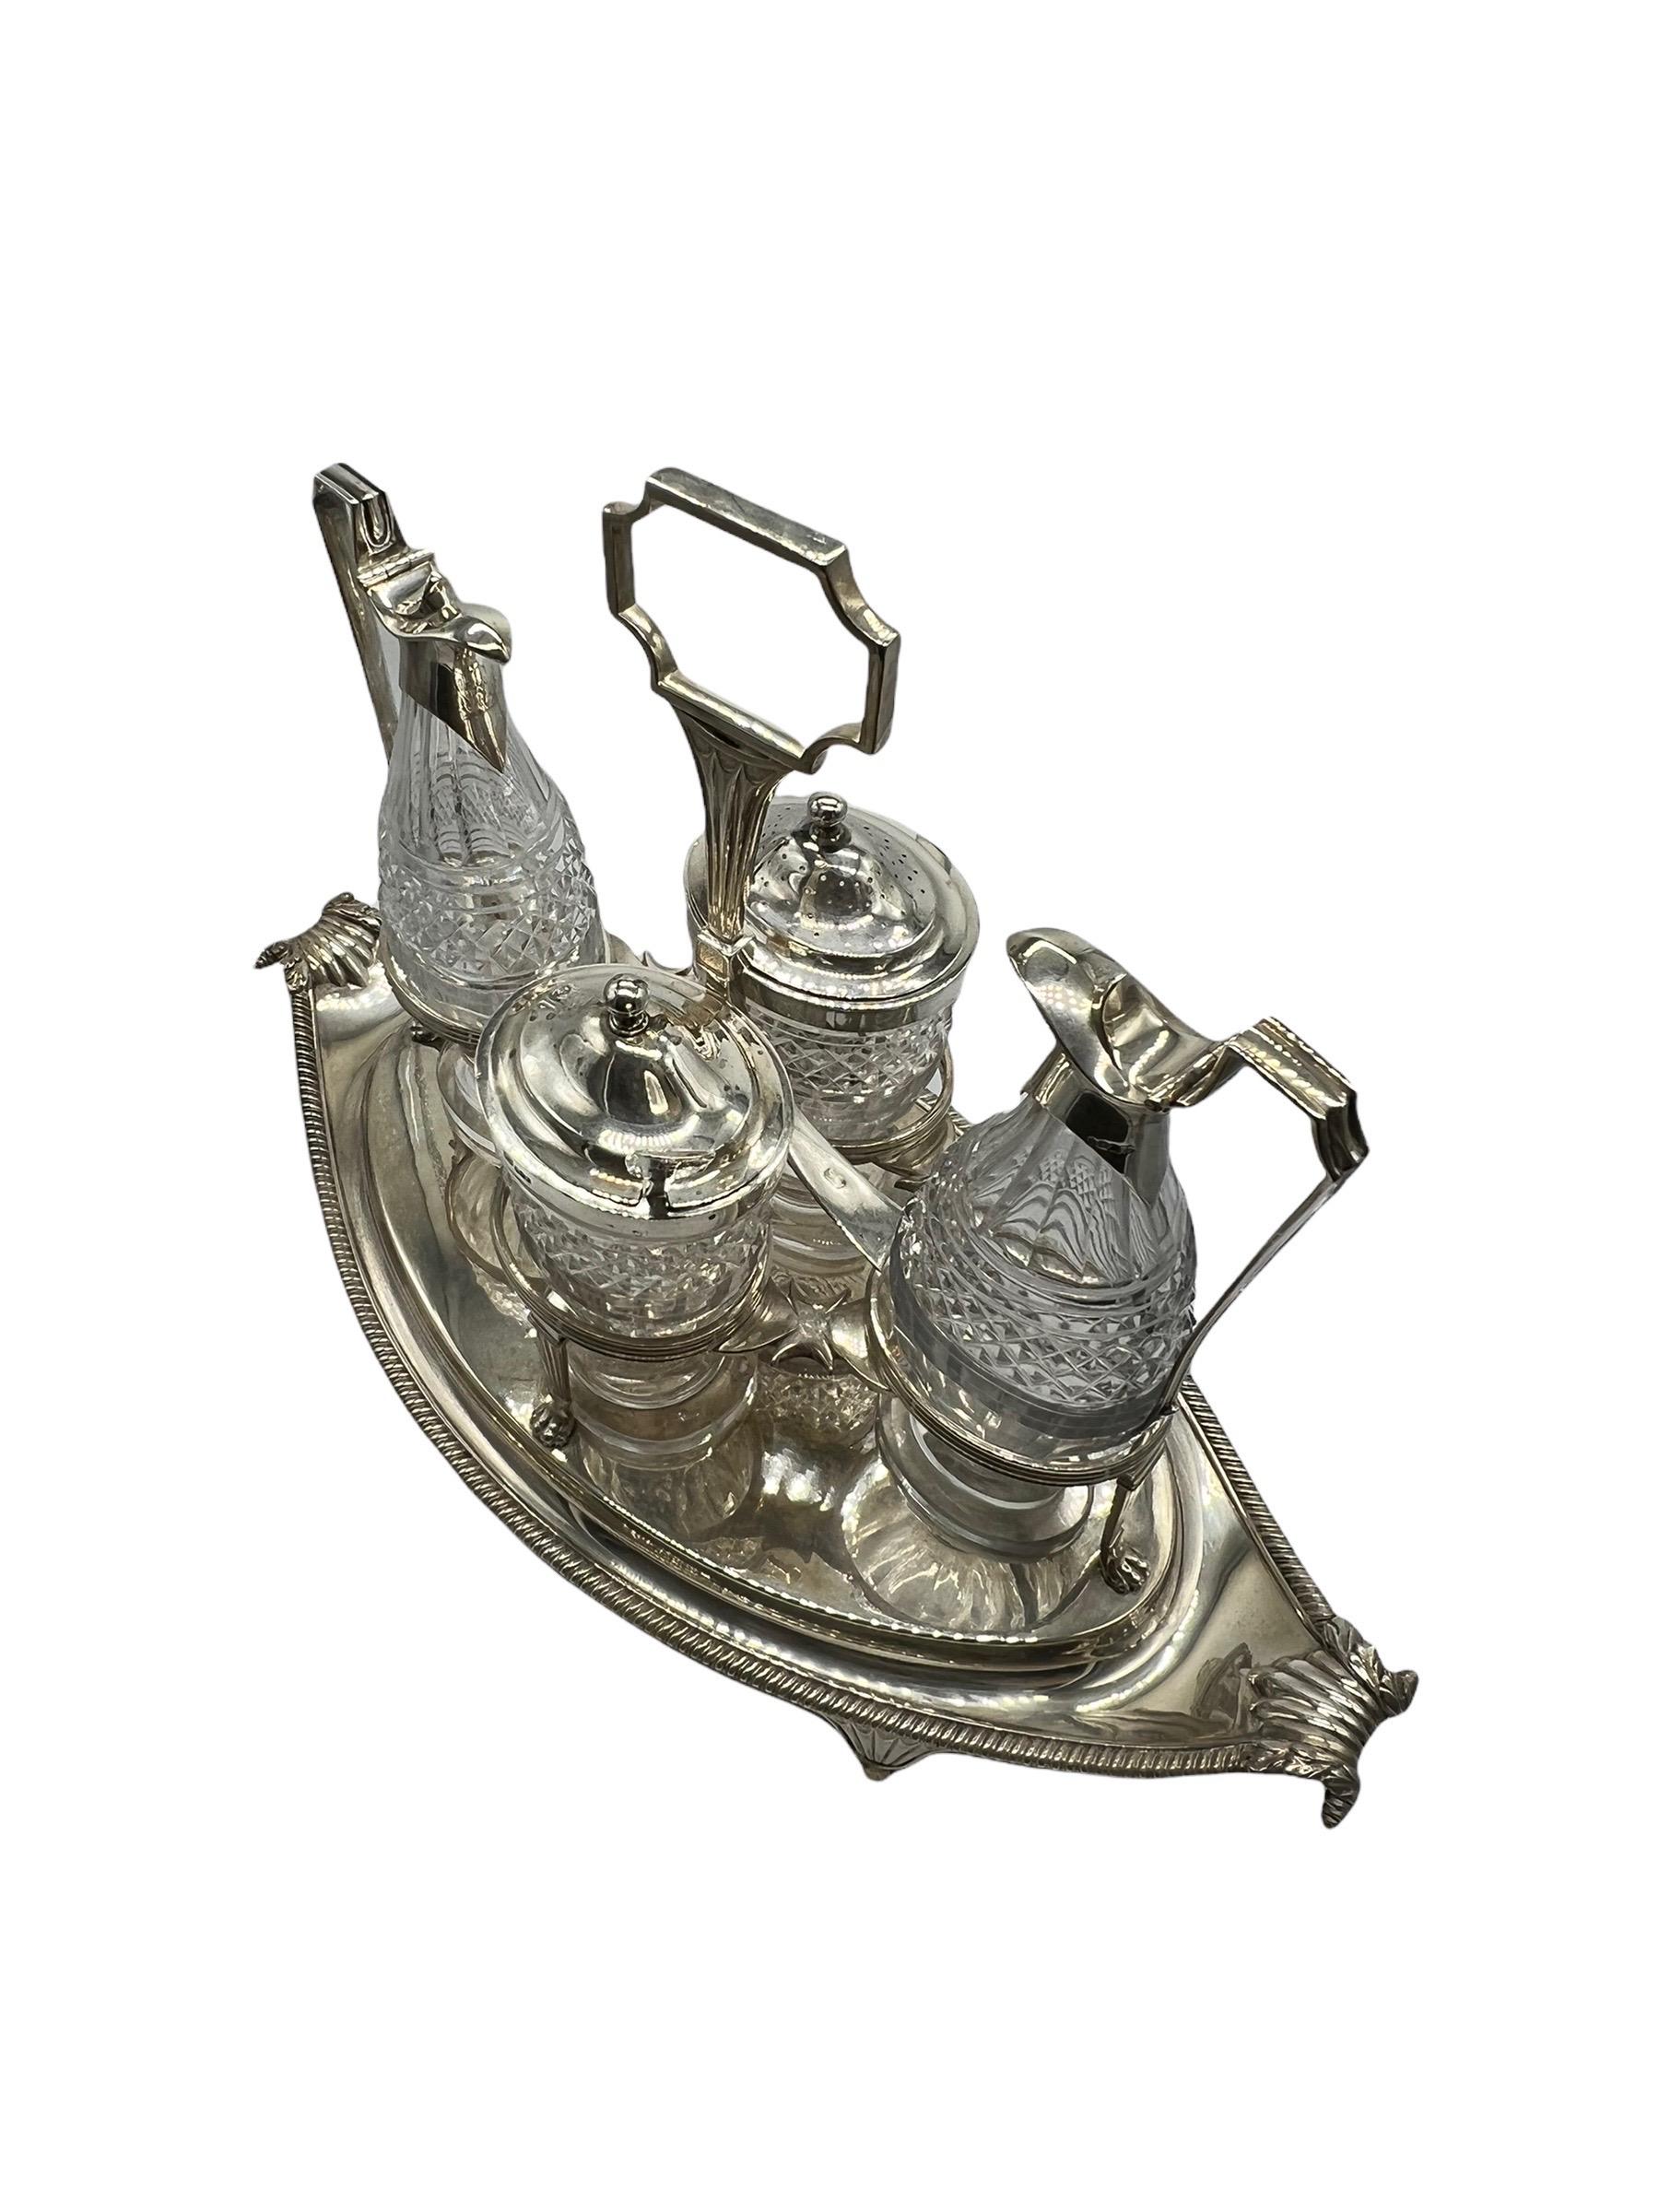 English Sterling Silver and Cut-Glass Cruet Set by Paul Storr, Early 1800s For Sale